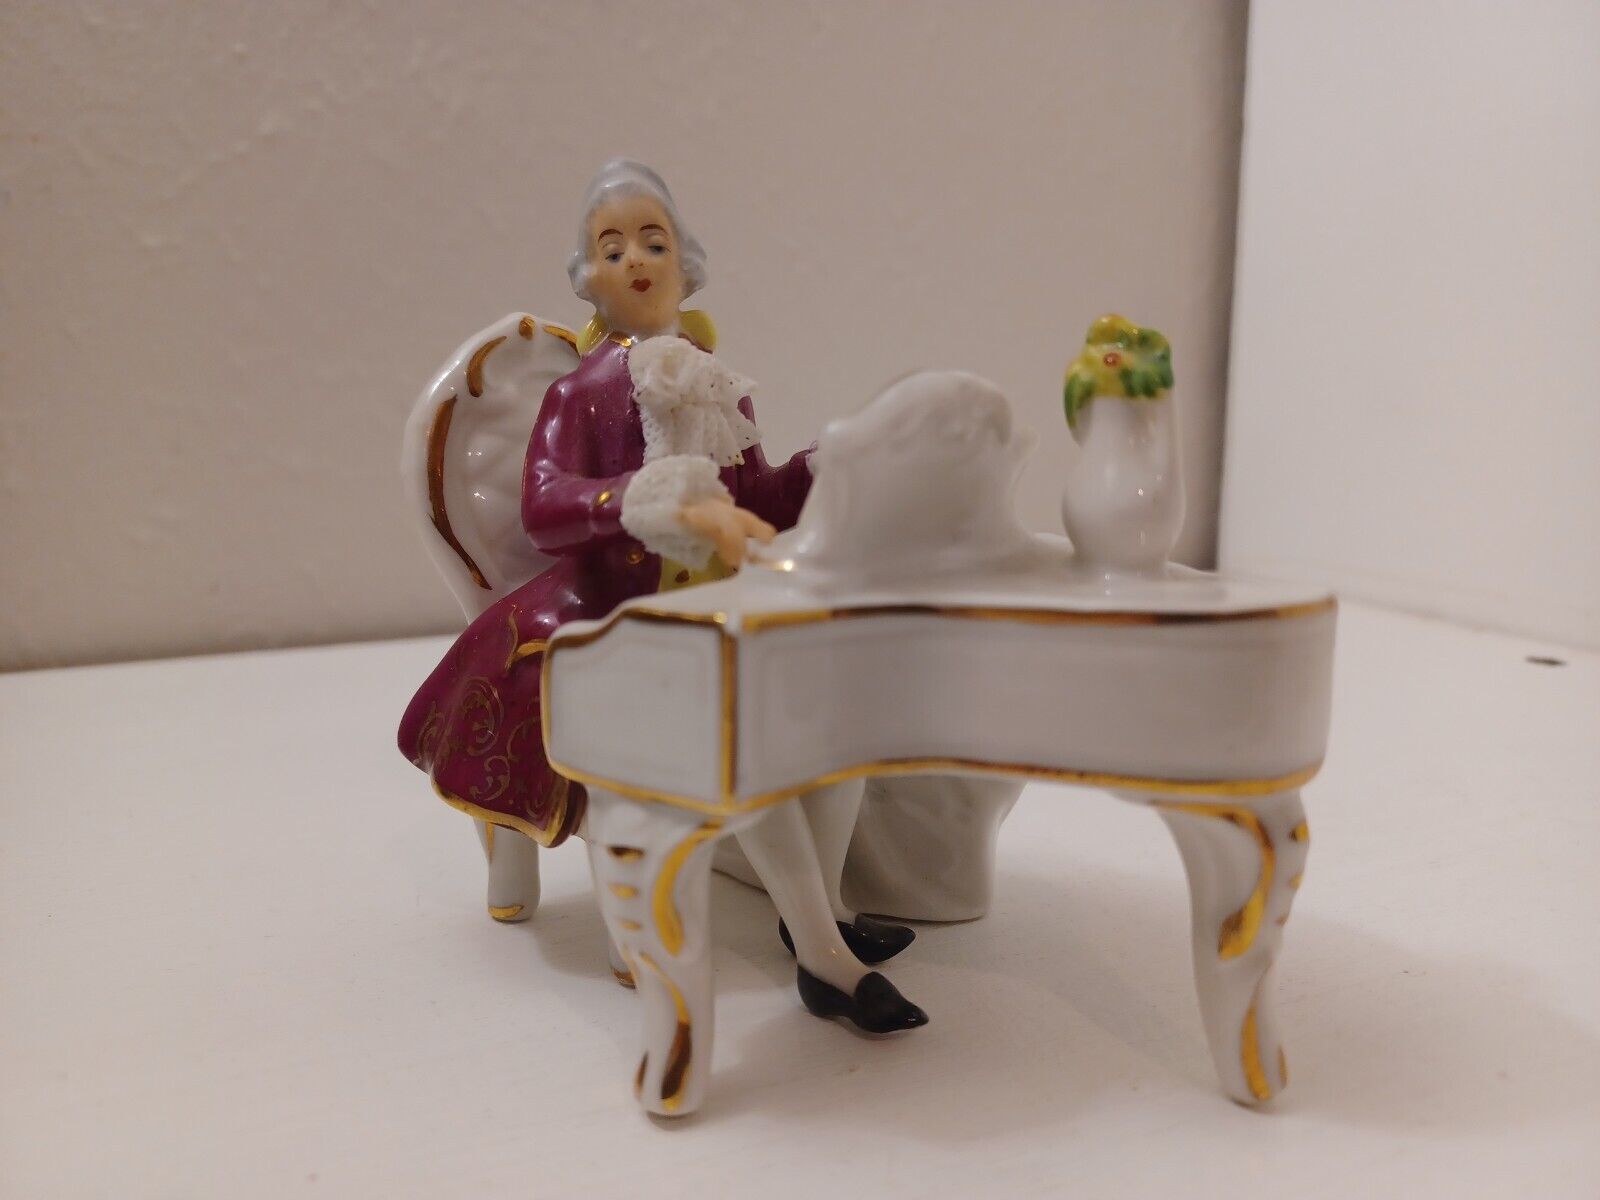 Alka Dresden Made in Germany Porcelain Figurine Man Playing Piano 